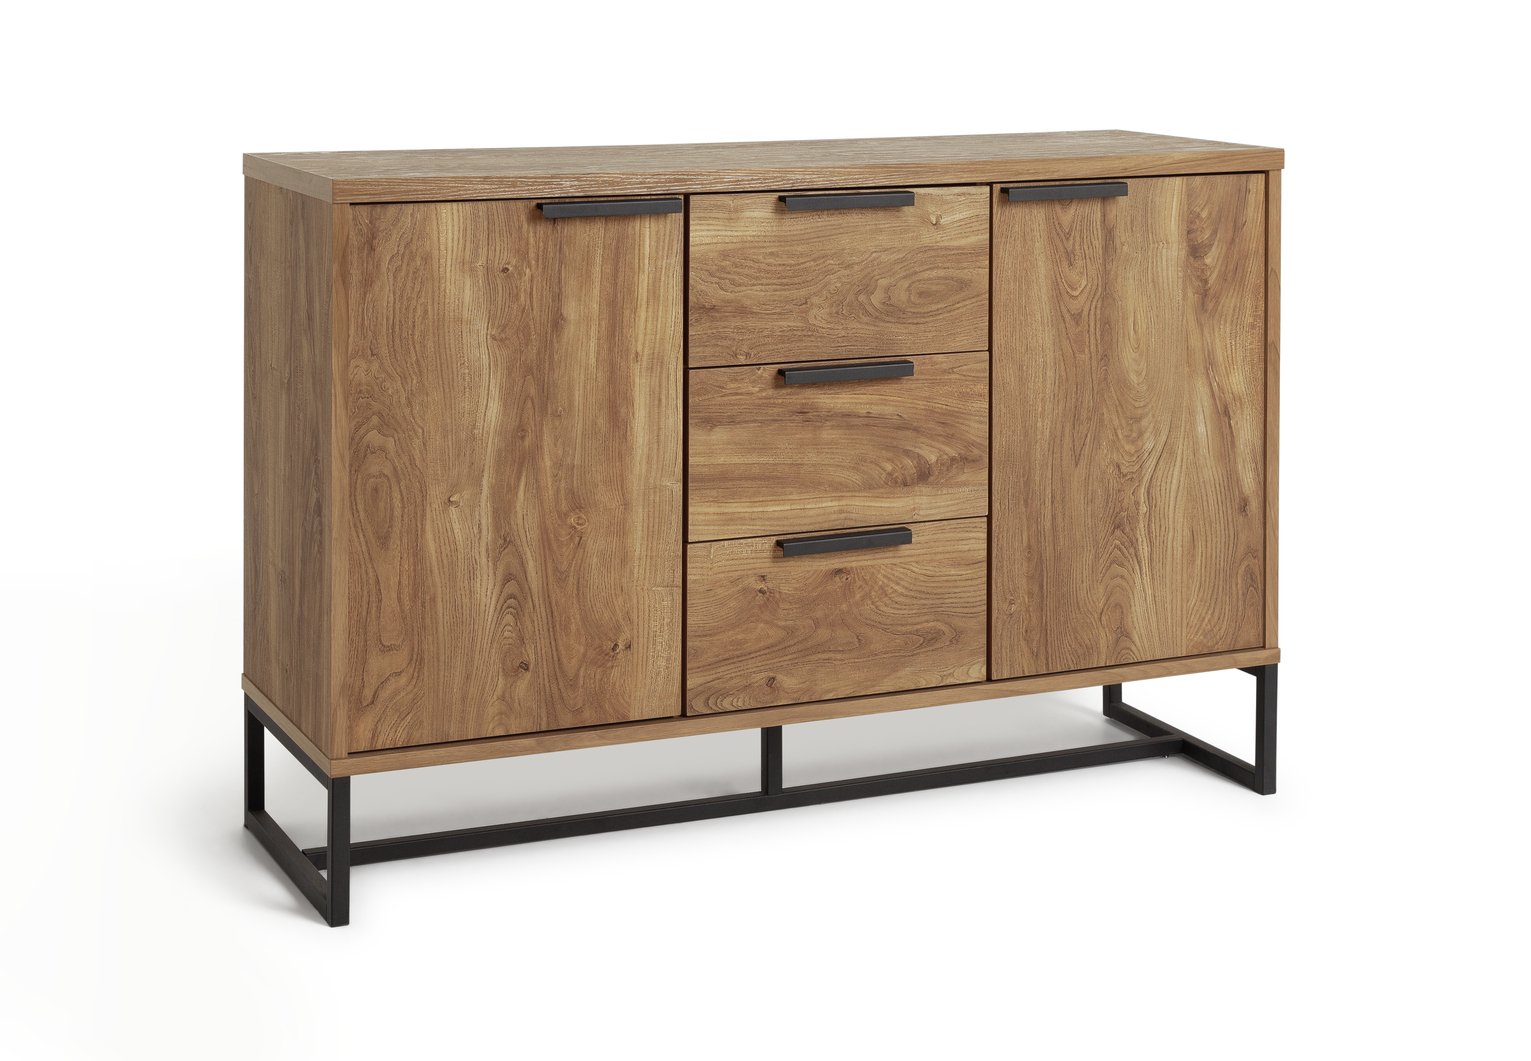 Argos Home Nomad Large Sideboard review